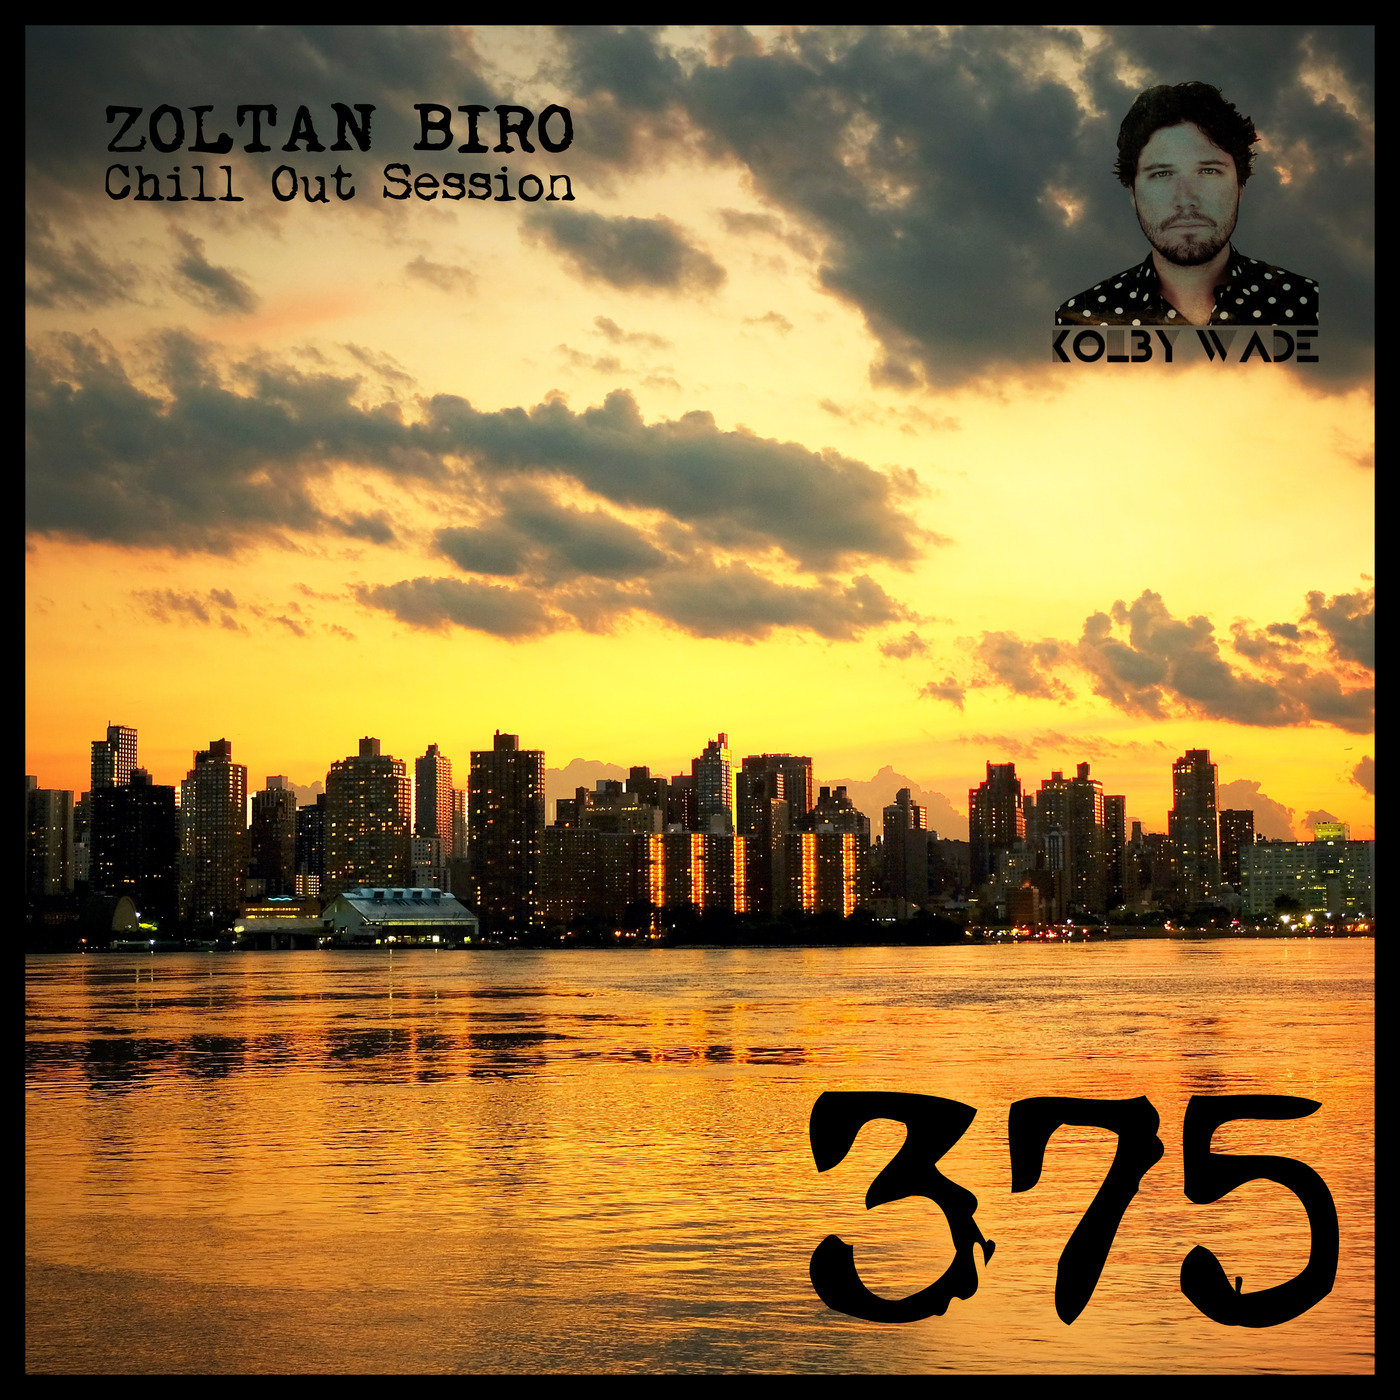 Zoltan Biro - Chill Out Session 375 [including: Kolby Wade Special Mix]